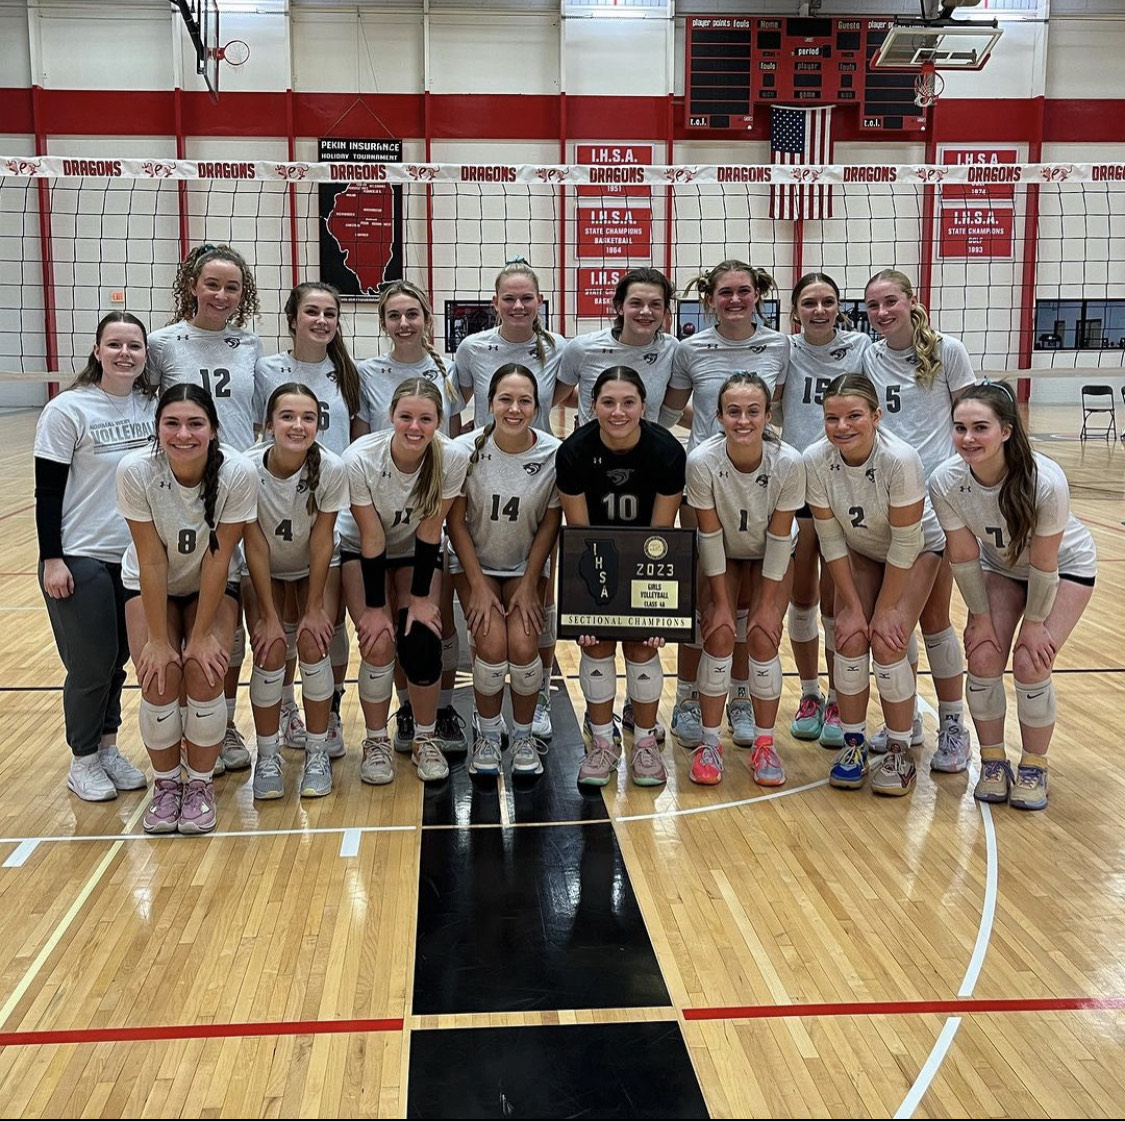 The 2023 Wildcat volleyball team are officially Sectional champions! They will face Mother McCauley High School in the Super-Sectional matchup at Normal Community High School on Friday night at 7 pm.